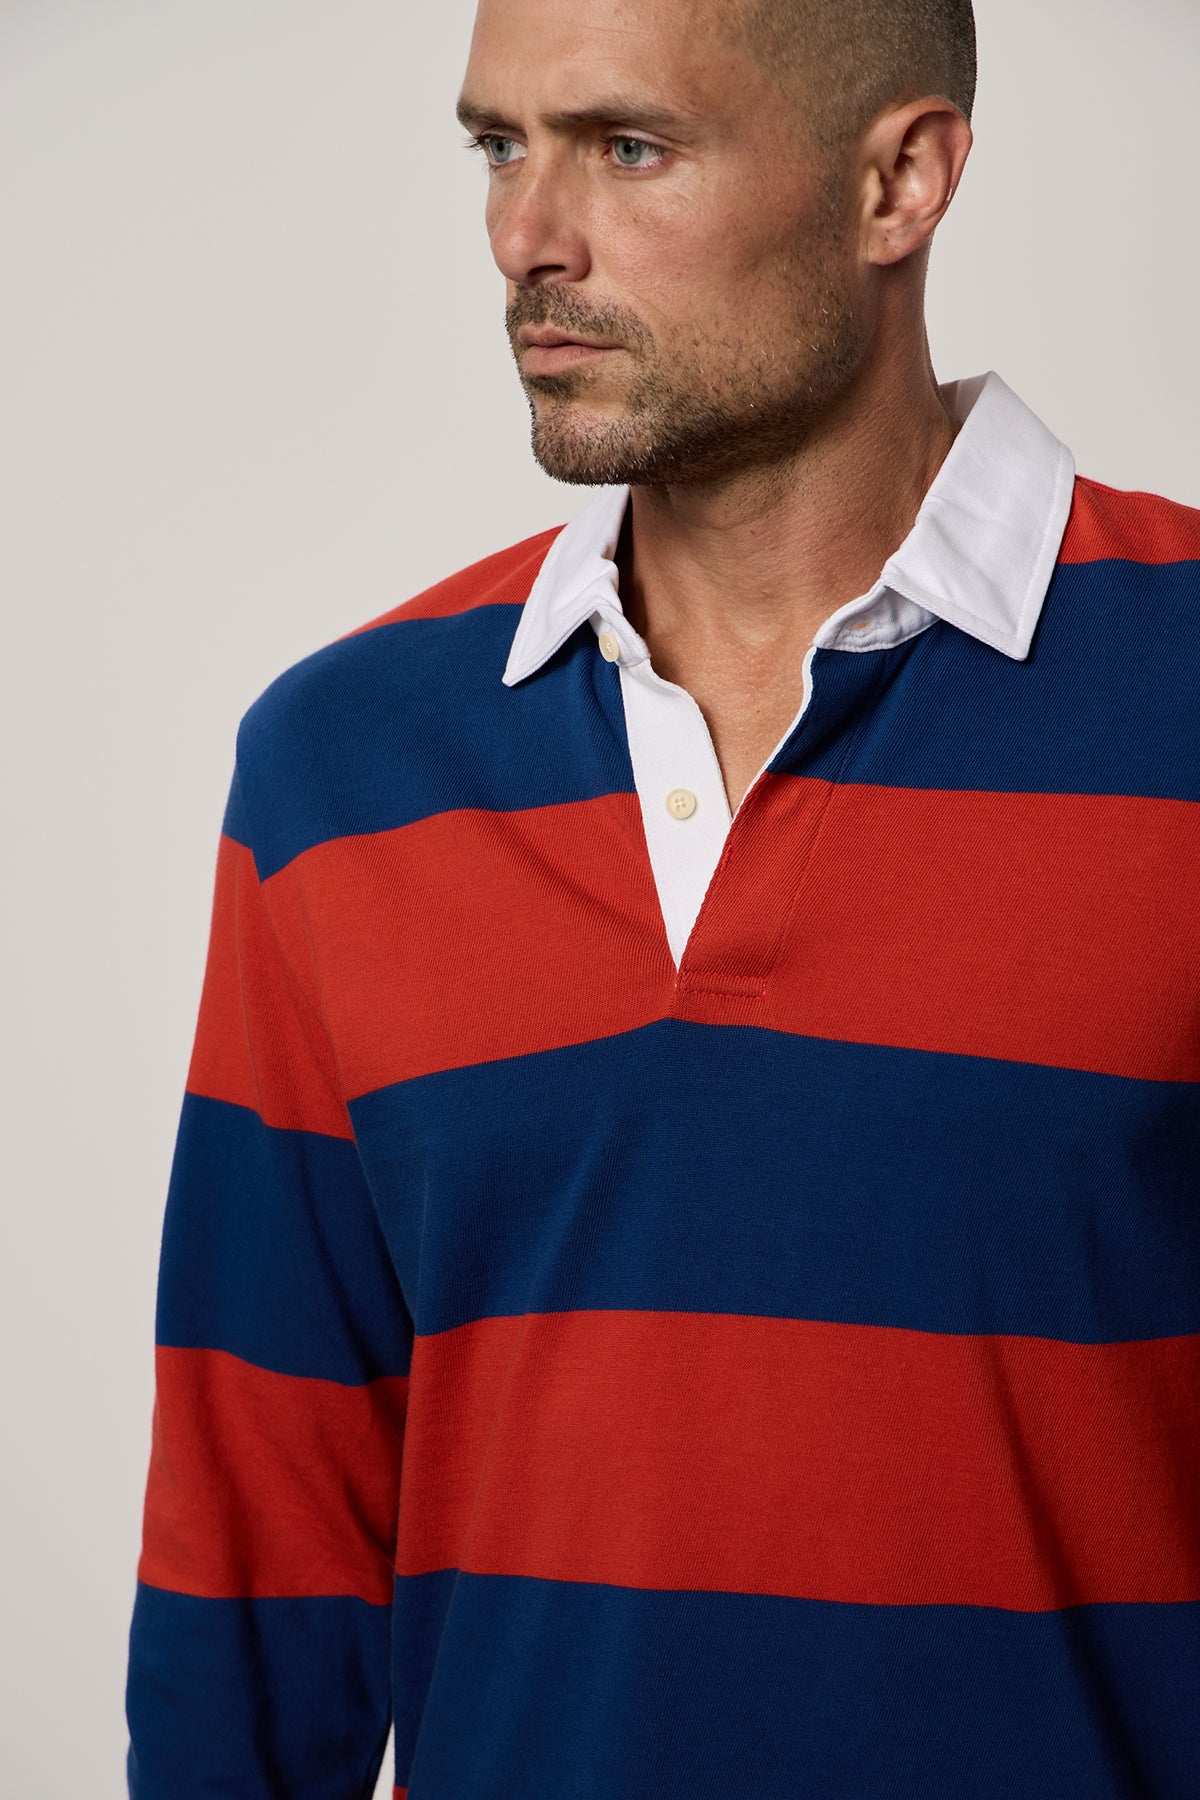 Pierre Rugby Stripe long sleeve polol with broad blue and red stripes and white collar front close up-25994790568129